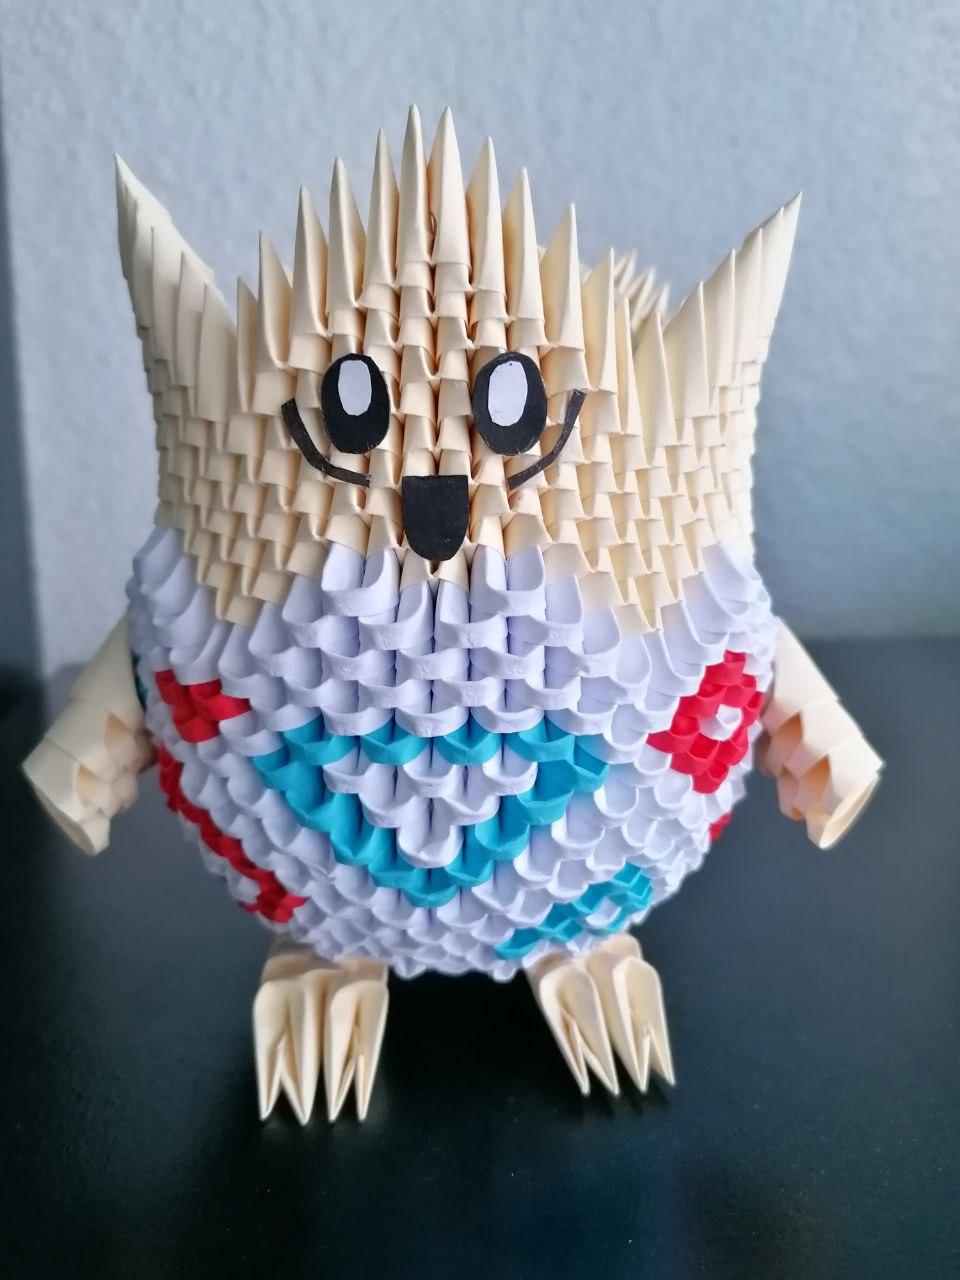 An owl made of colored paper